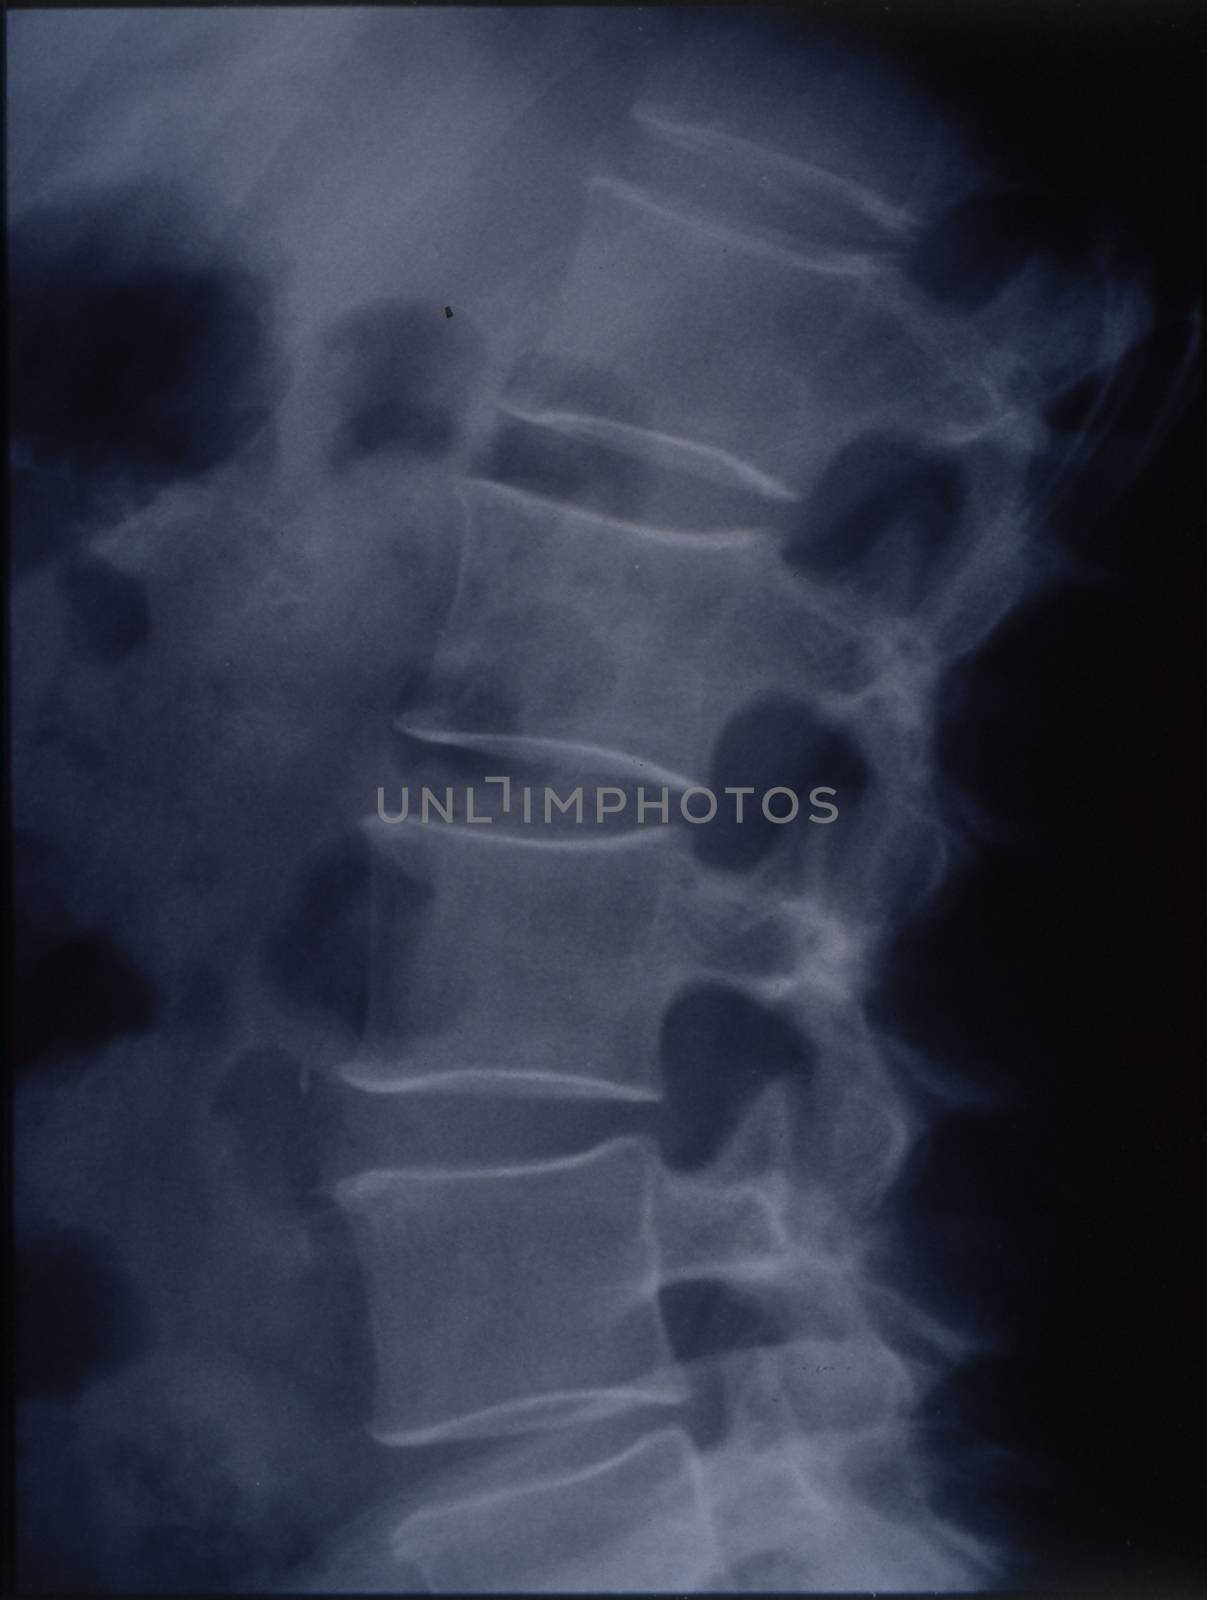 X-ray image of the spine for medical diagnosis by Dr-Lange